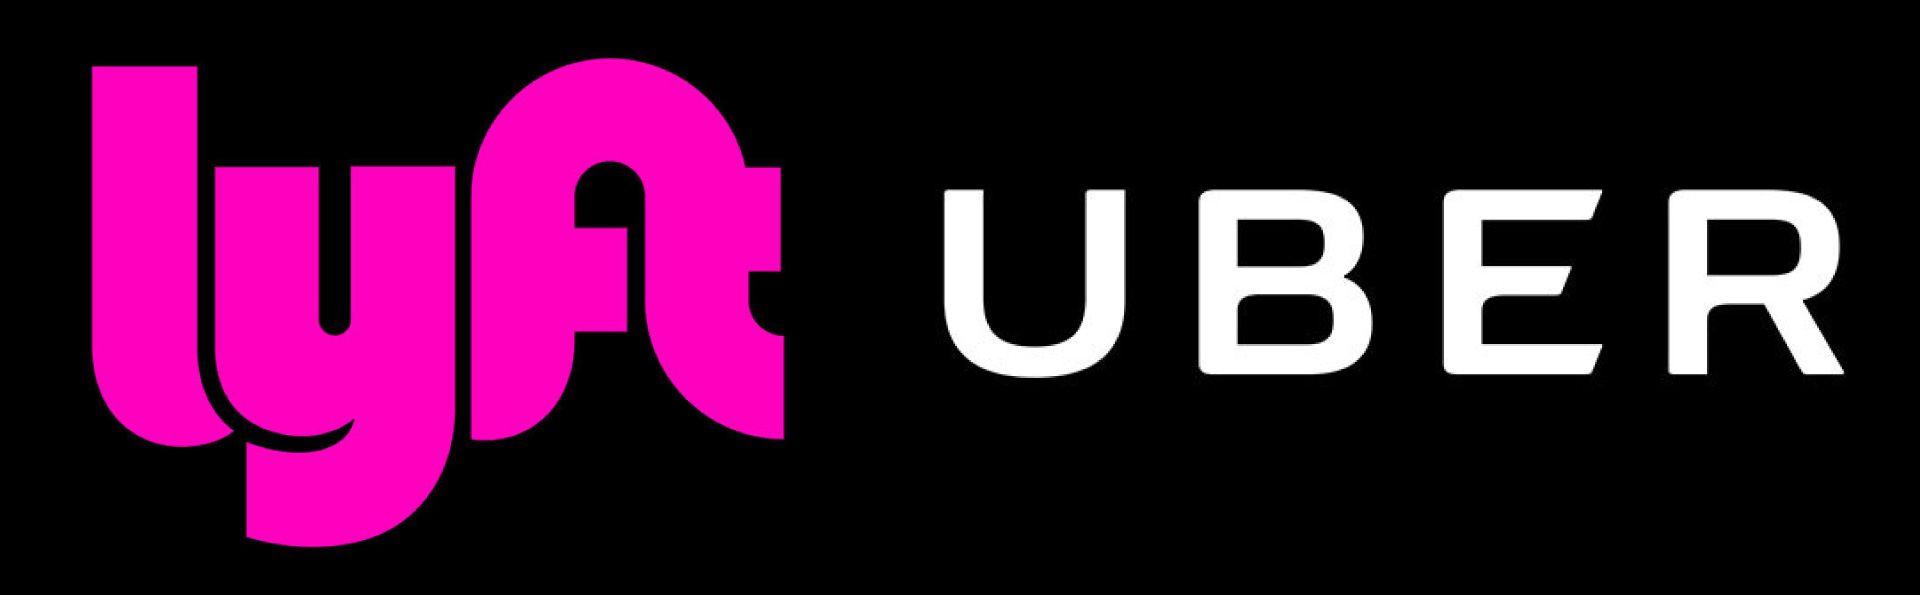 Official Lyft Logo - Best Economical Kia Models for Uber and Lyft Drivers - Kia of Quakertown